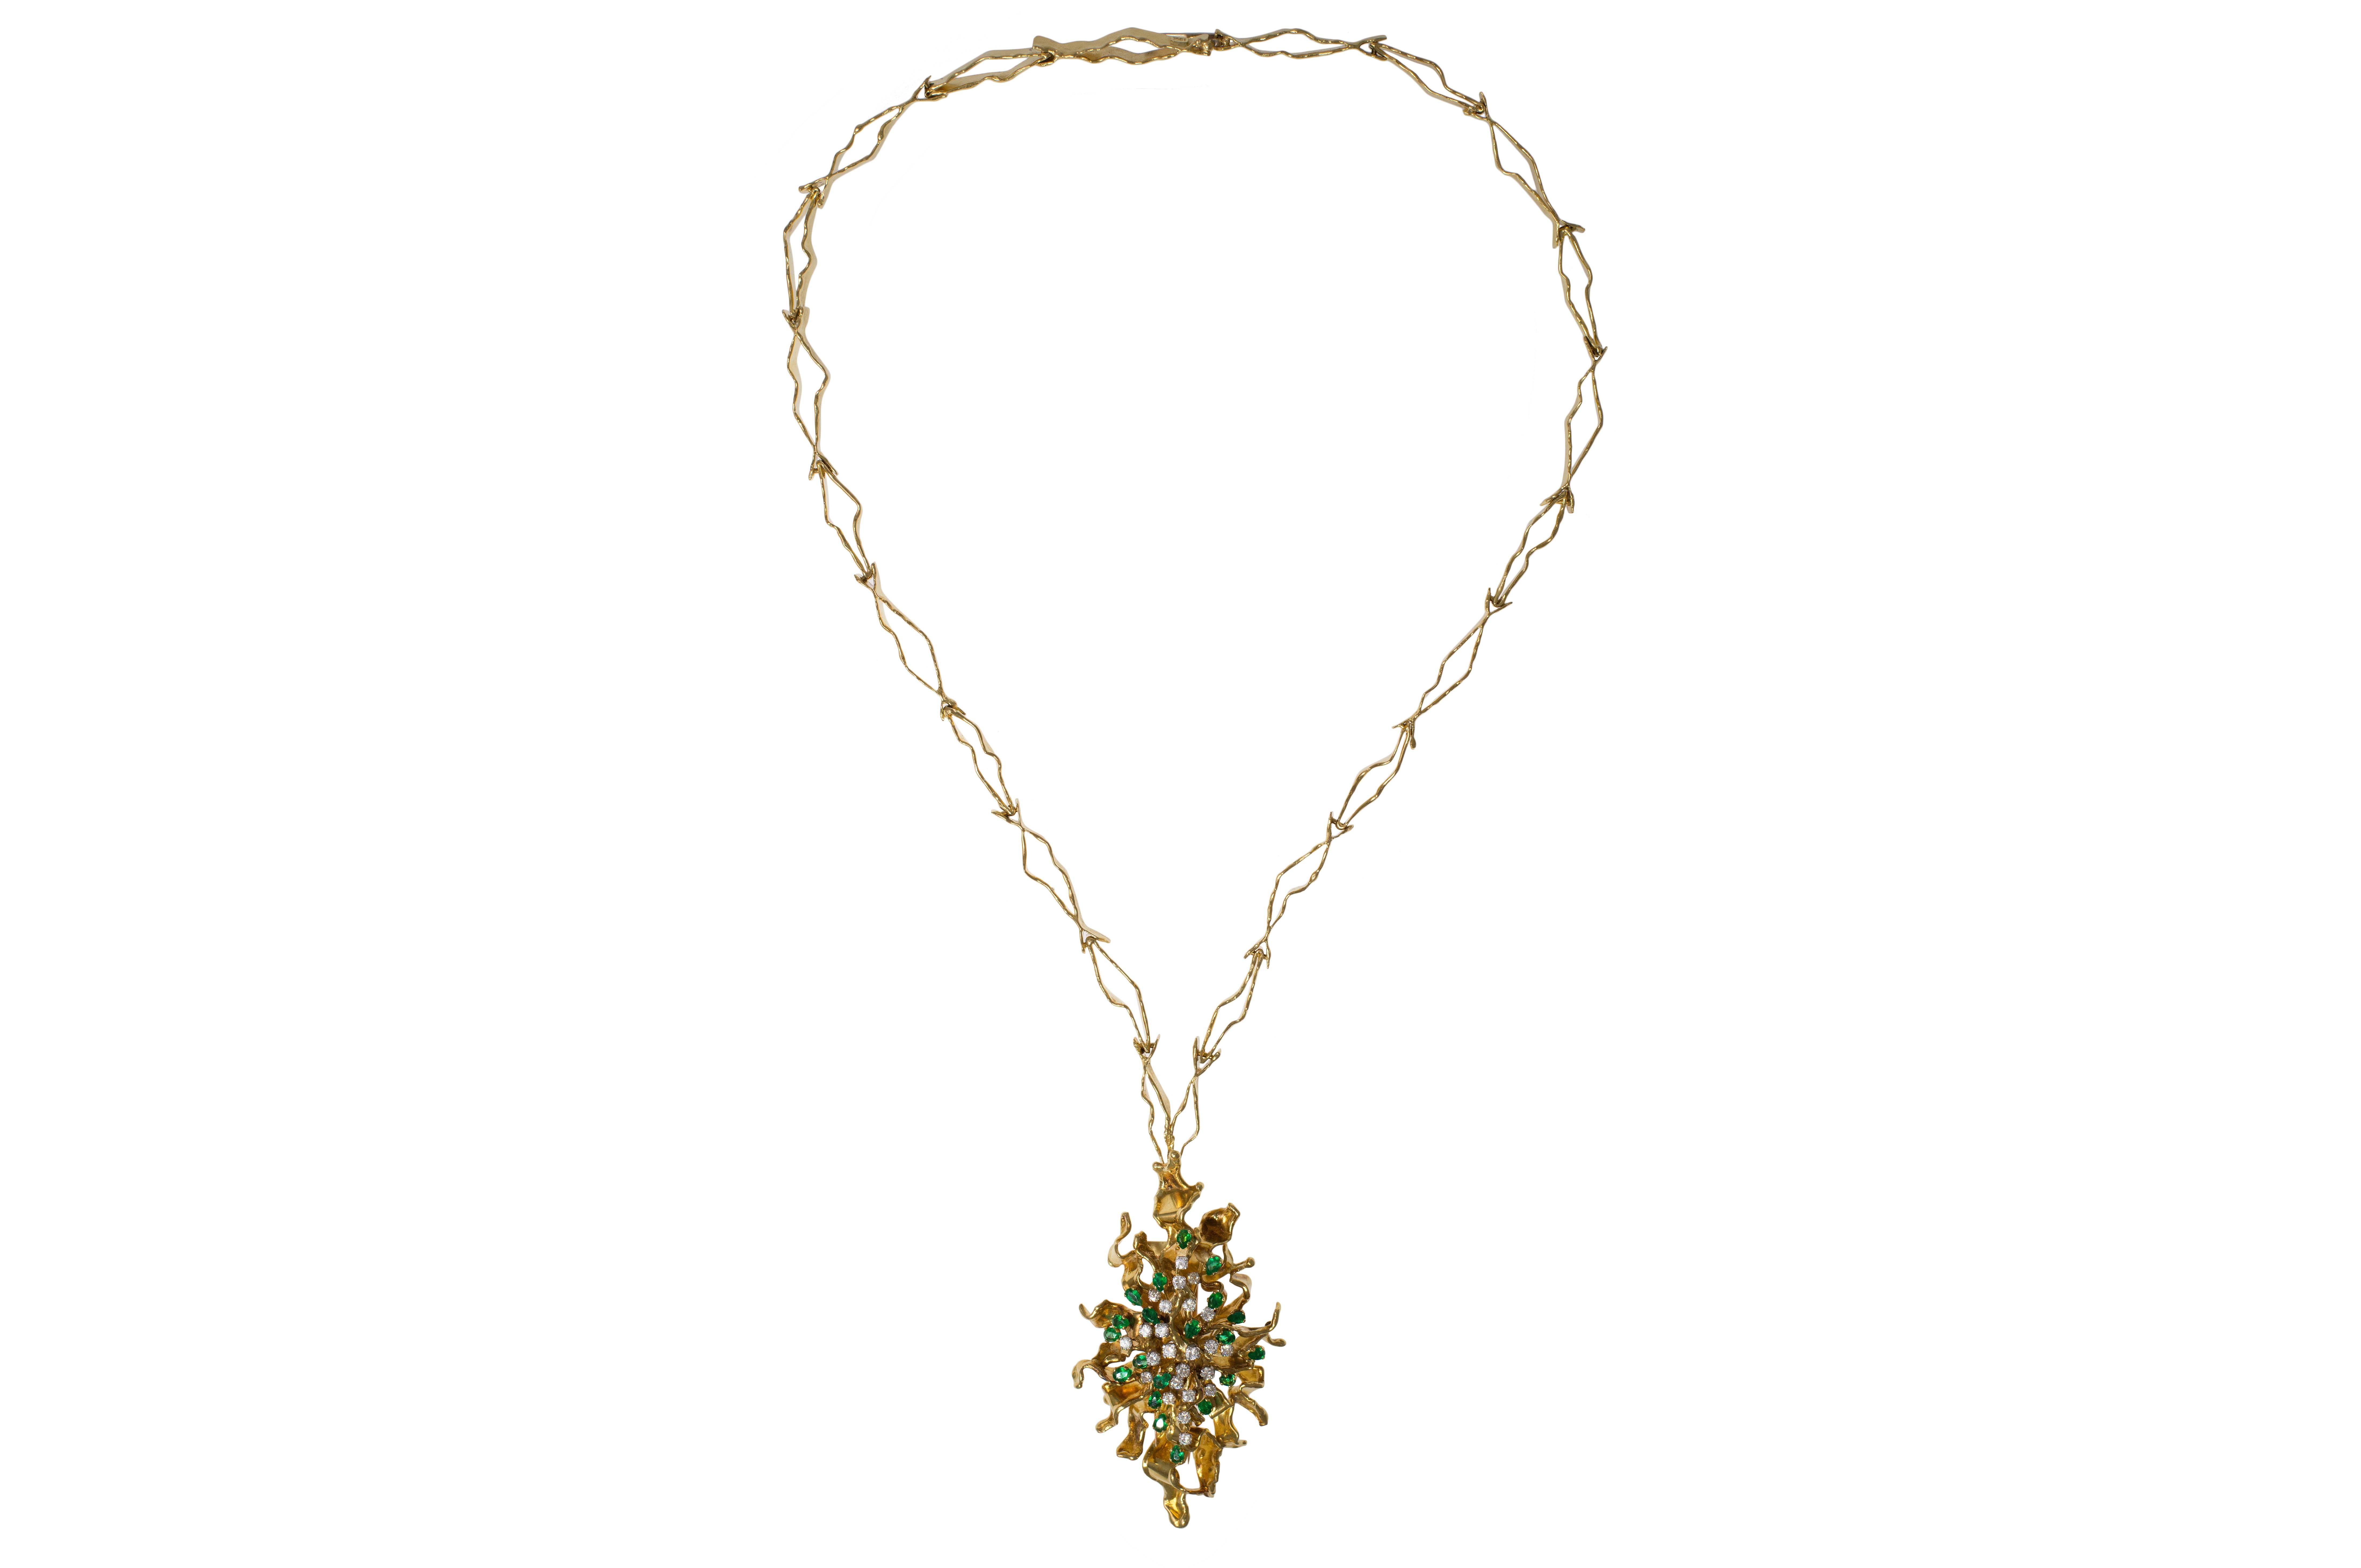 A one-of-a-kind, handmade, diamond, emerald and textured 18 karat gold detachable brooch-pendant, on a textured 18k gold chain, by London artist and jeweler George Weil, c. 1970. 